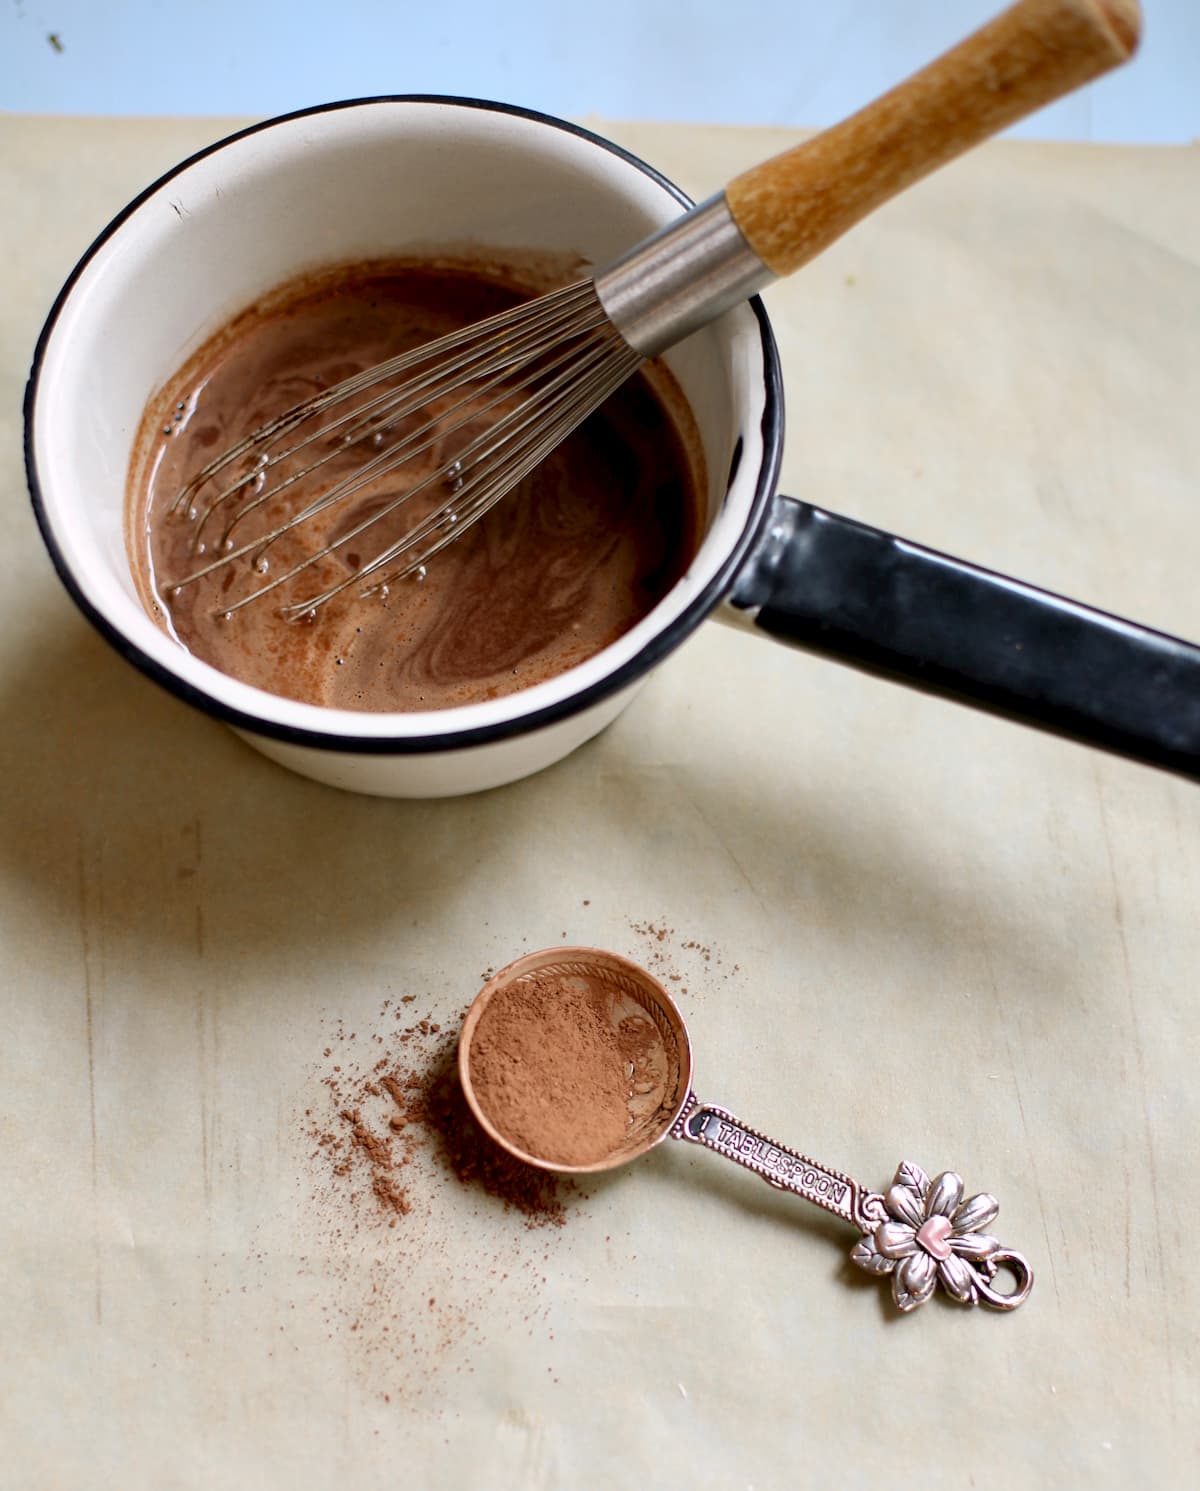 saucepan of hot chocolate and a measuring spoon